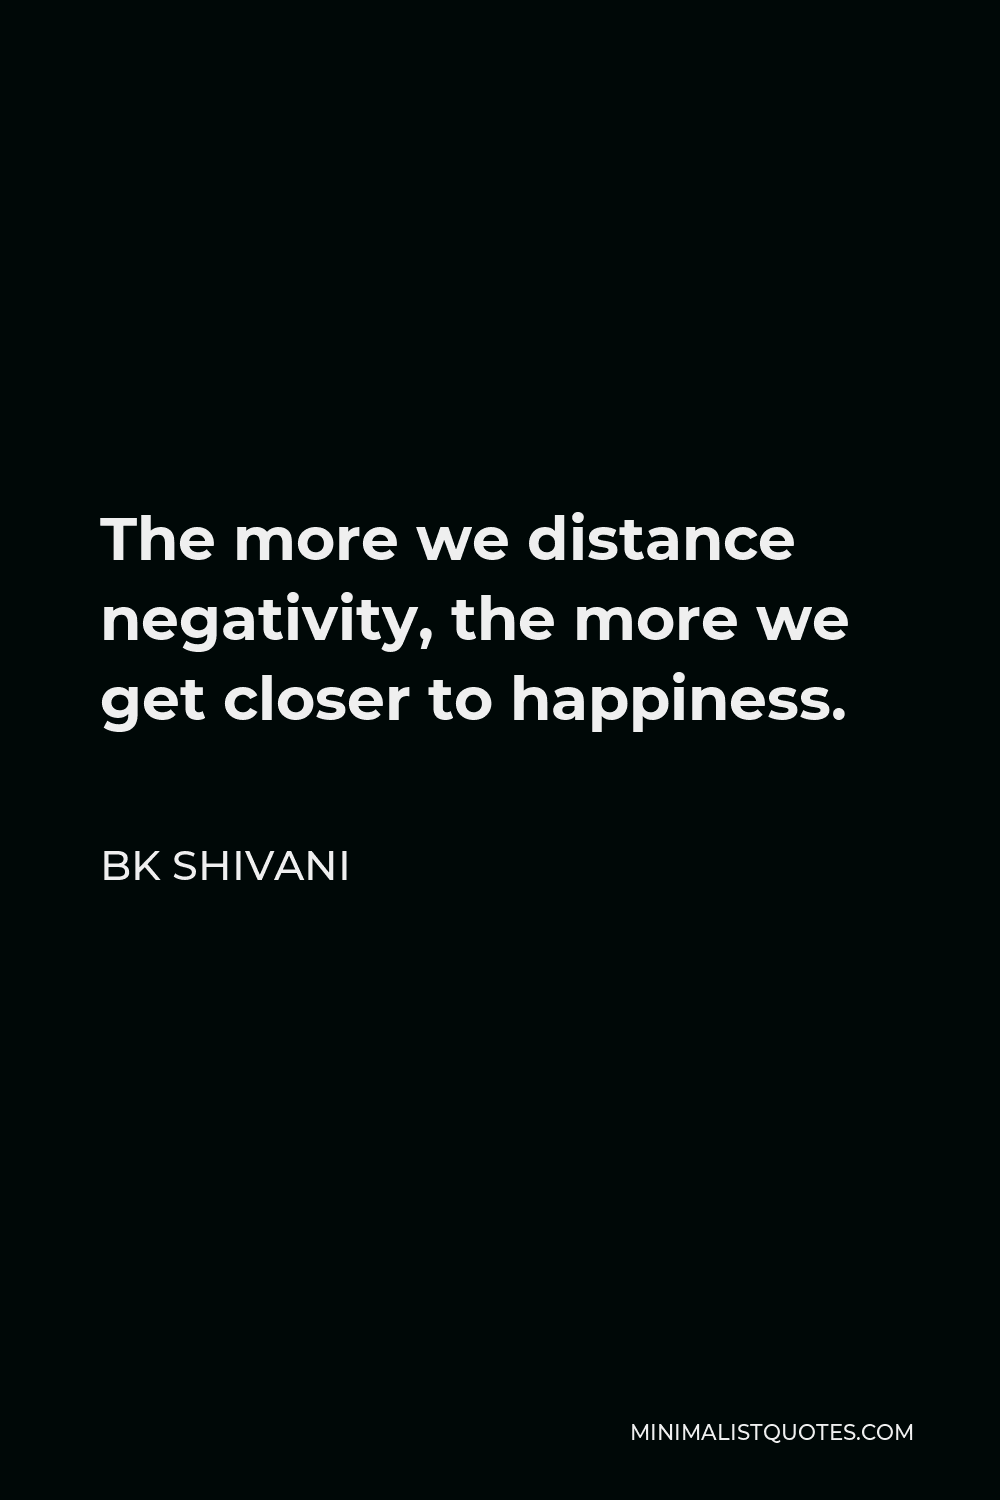 BK Shivani Quote - The more we distance negativity, the more we get closer to happiness.